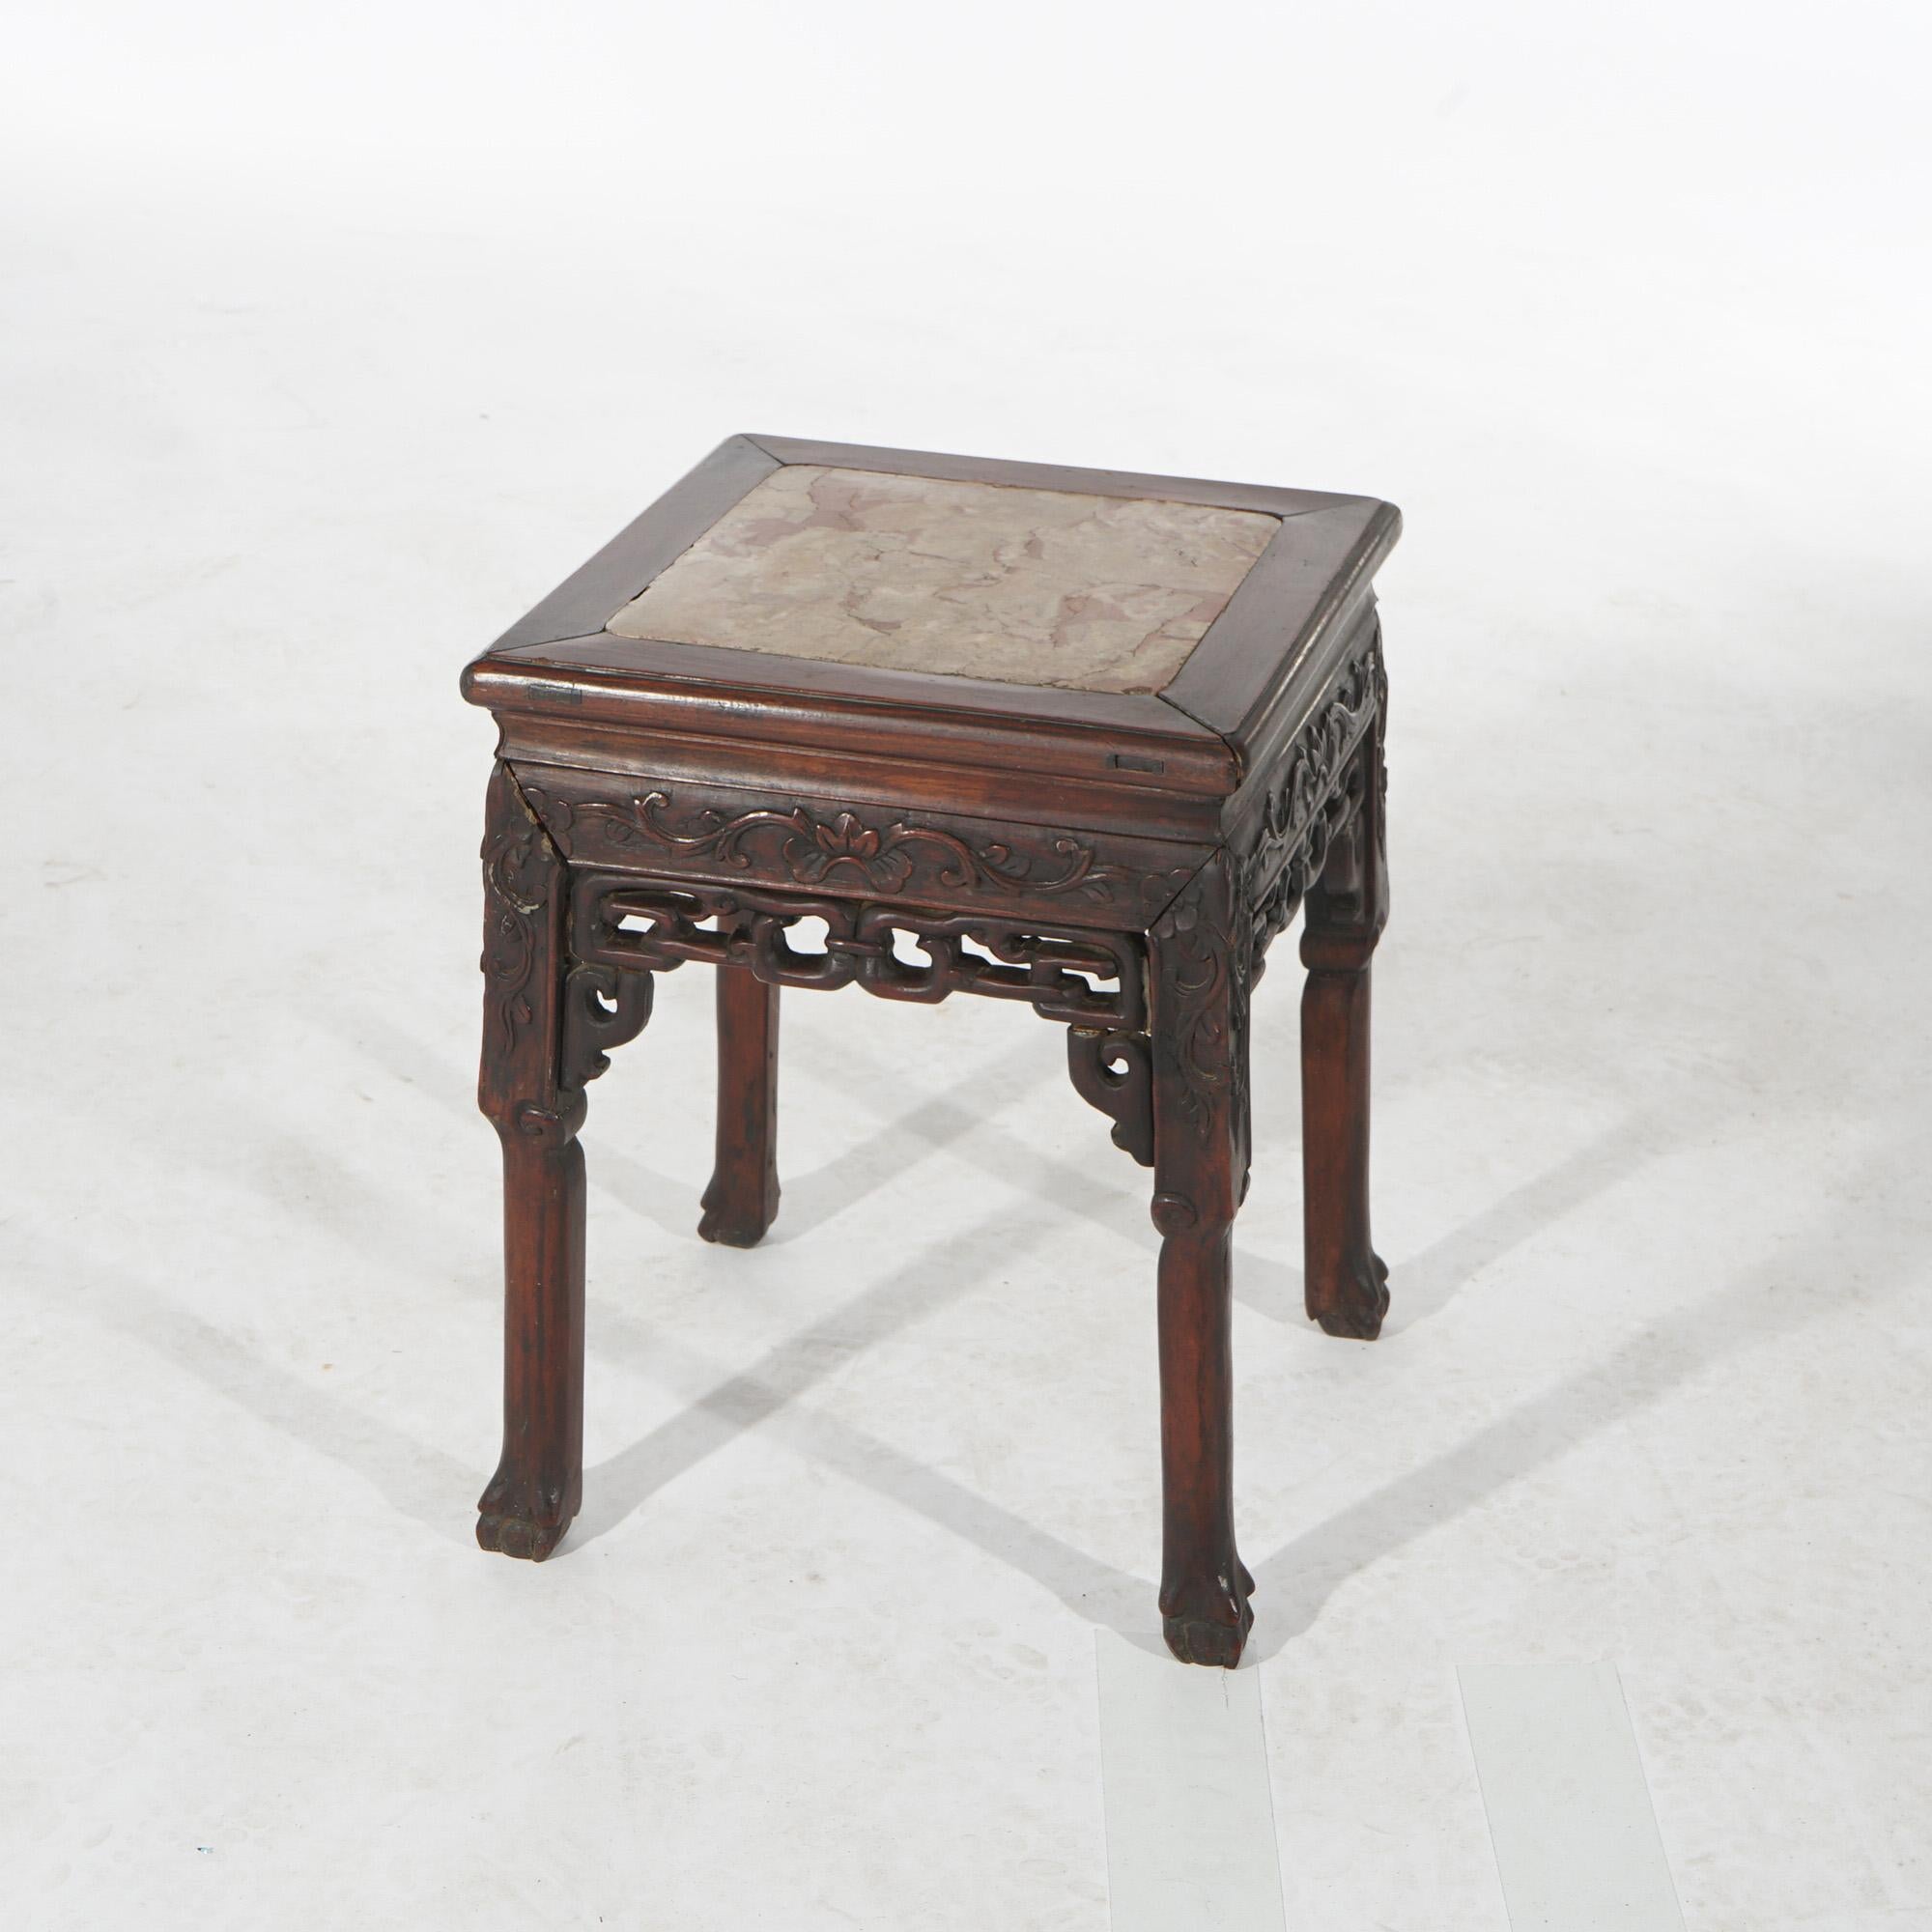 Antique Chinese Foliate Carved Rosewood Stand with Inset Rouge Marble Top C1910

Measures- 18''H x 14.5''W x 14.5''D